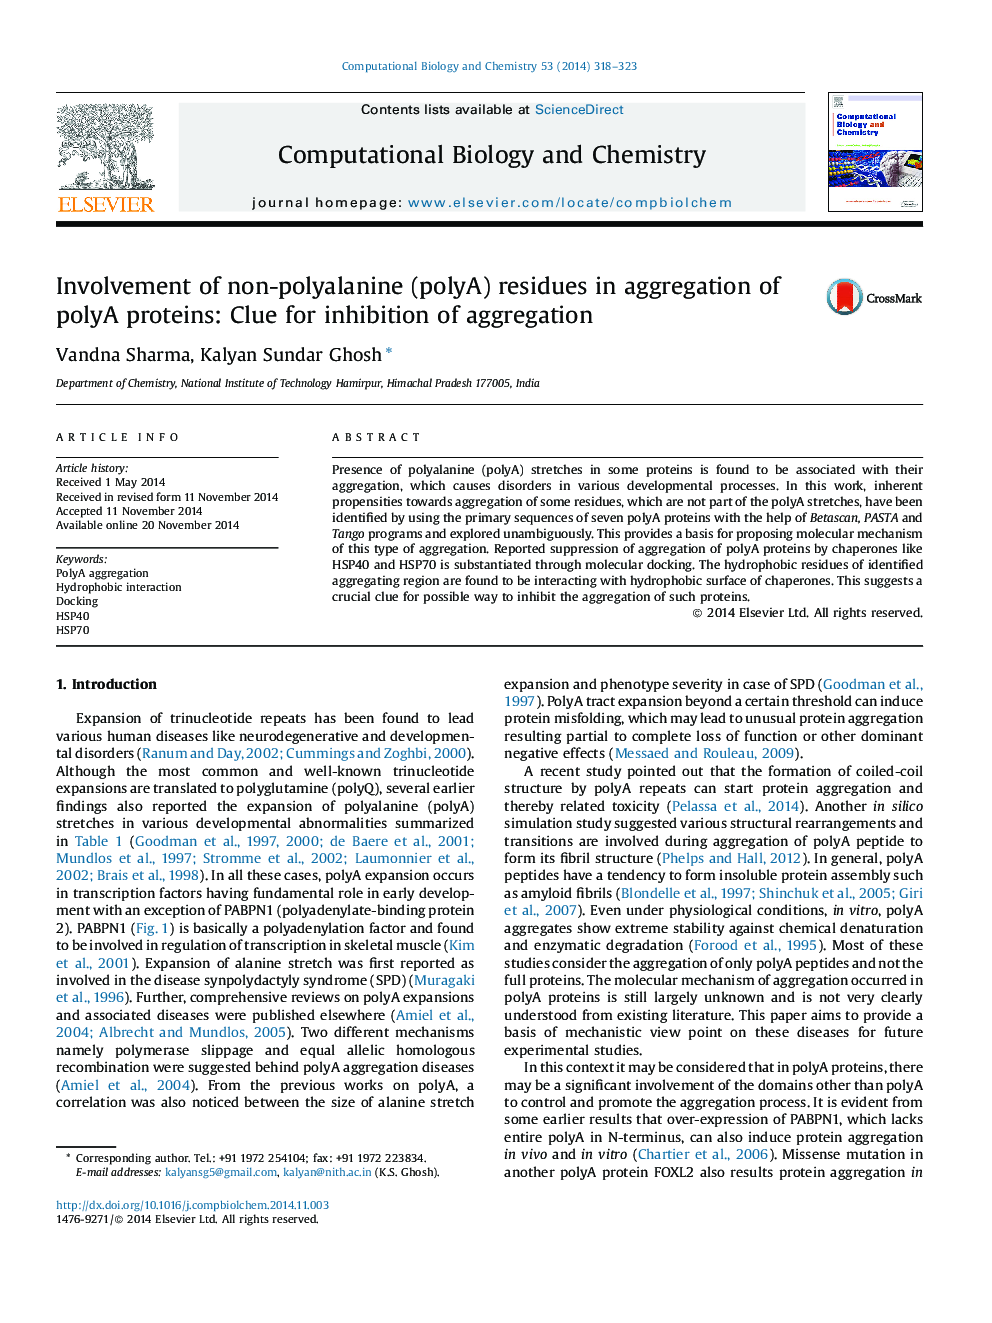 Involvement of non-polyalanine (polyA) residues in aggregation of polyA proteins: Clue for inhibition of aggregation